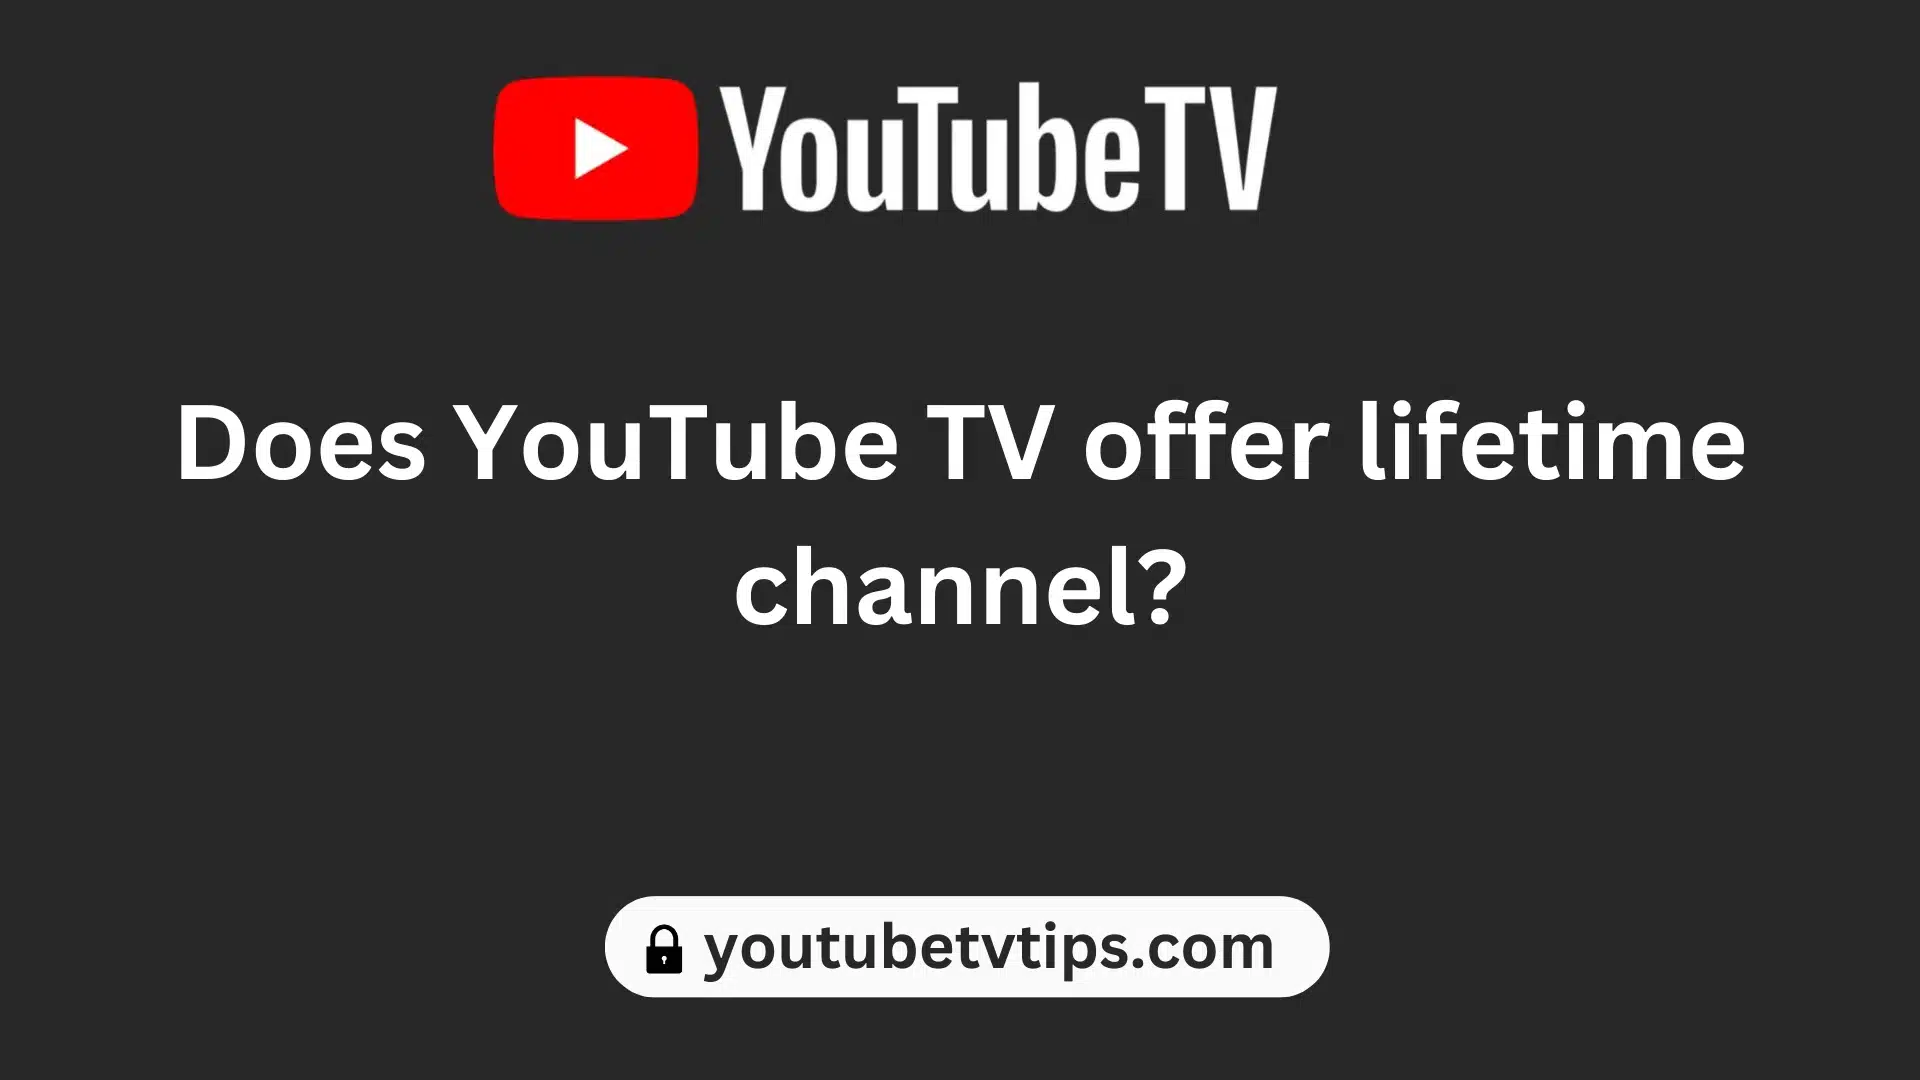 Does YouTube TV offer lifetime channel